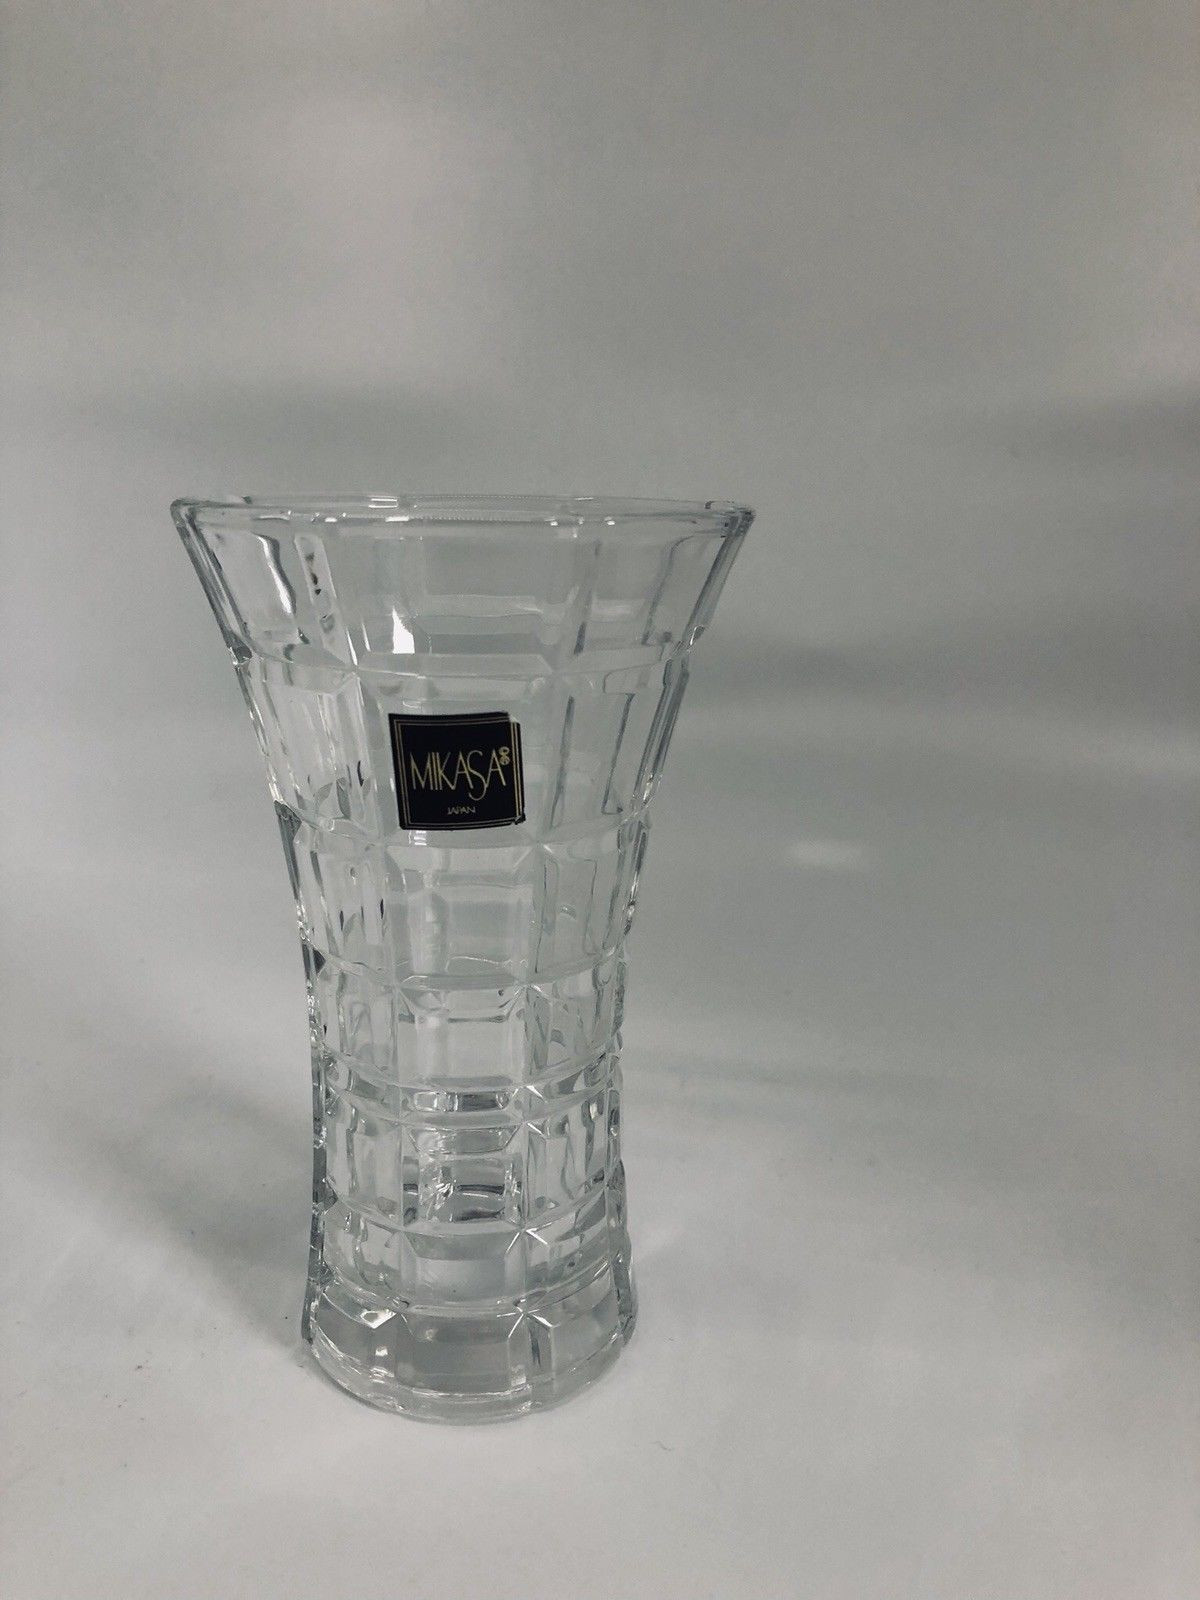 21 Ideal Mikasa Blossom Crystal Vase 2024 free download mikasa blossom crystal vase of mikasa monarchy crystal bud vase 4 3 4 ebay in norton secured powered by verisign